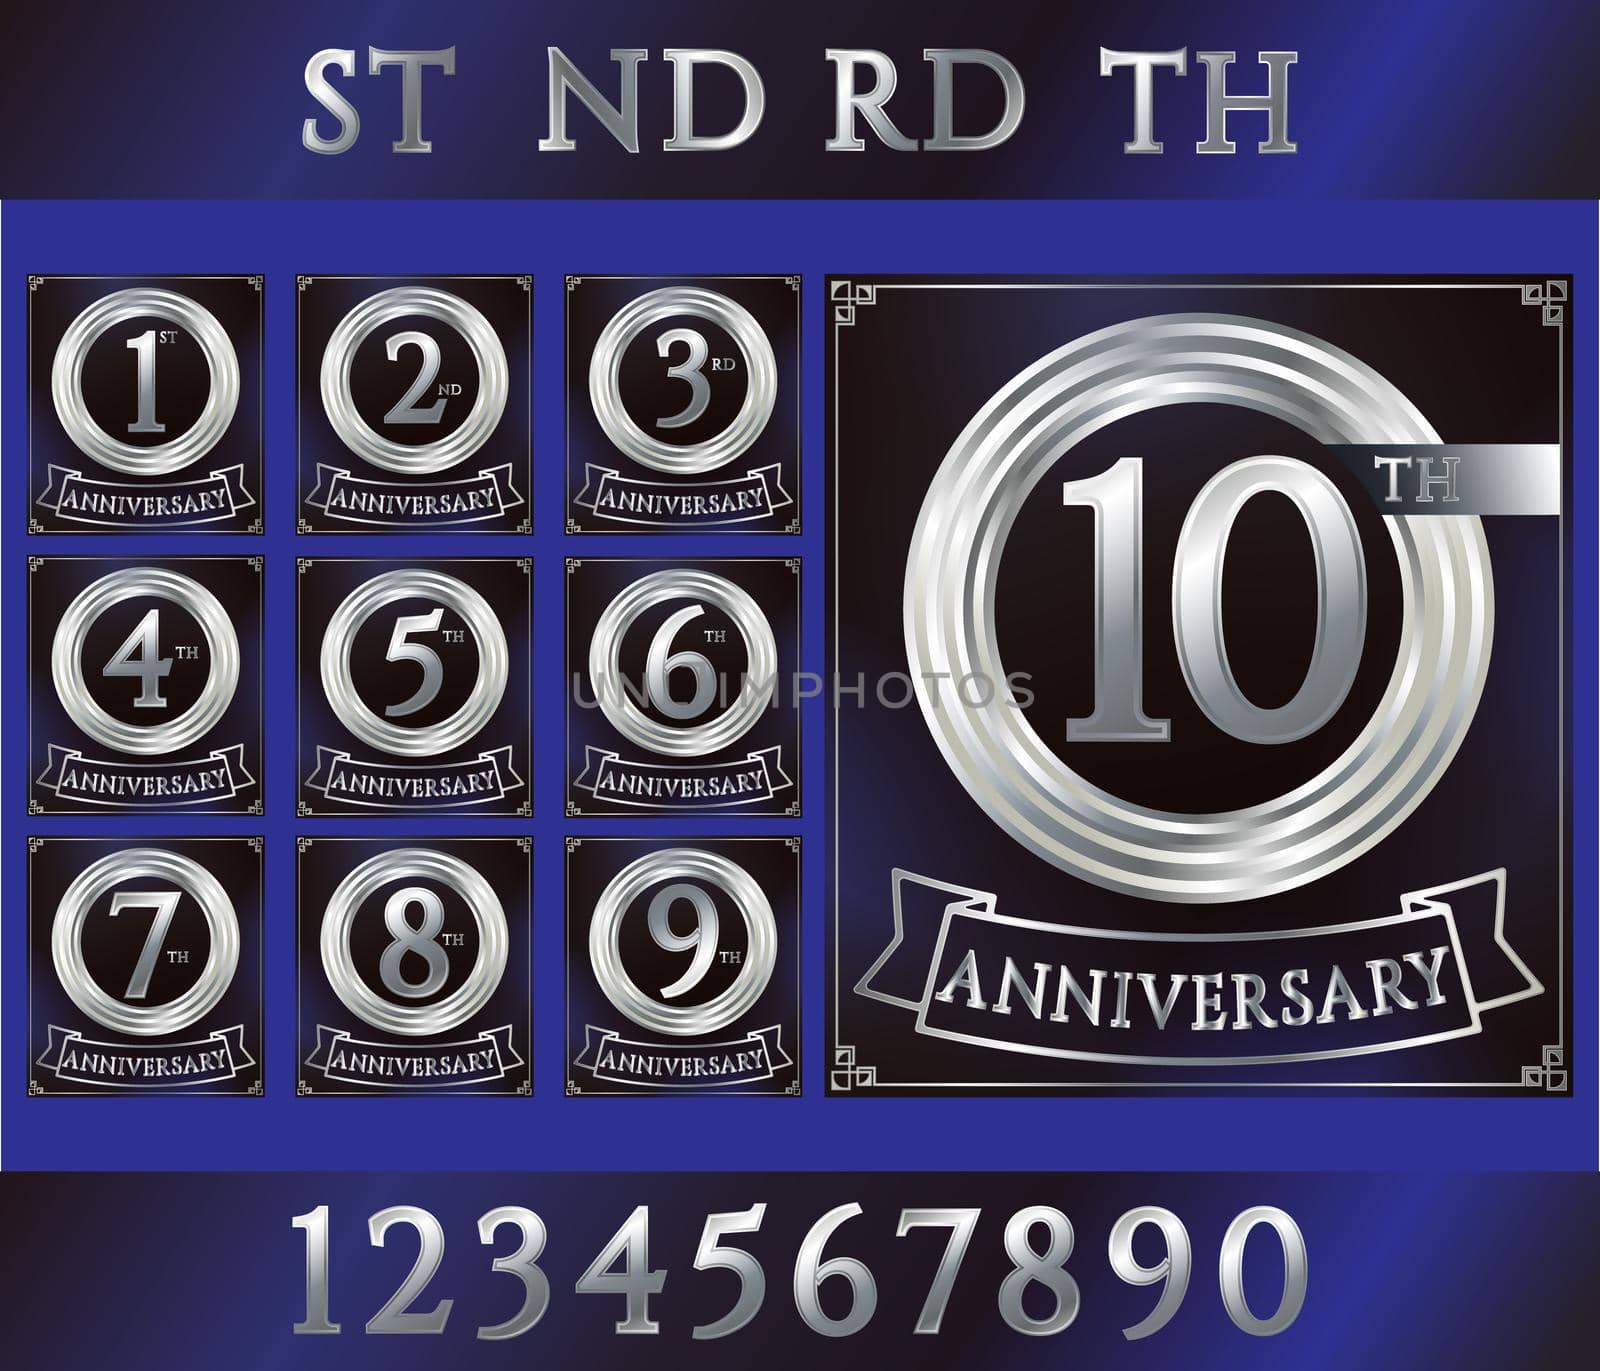 Anniversary silver ring logo number 1. Anniversary card with ribbon. Blue background. Vector illustration.